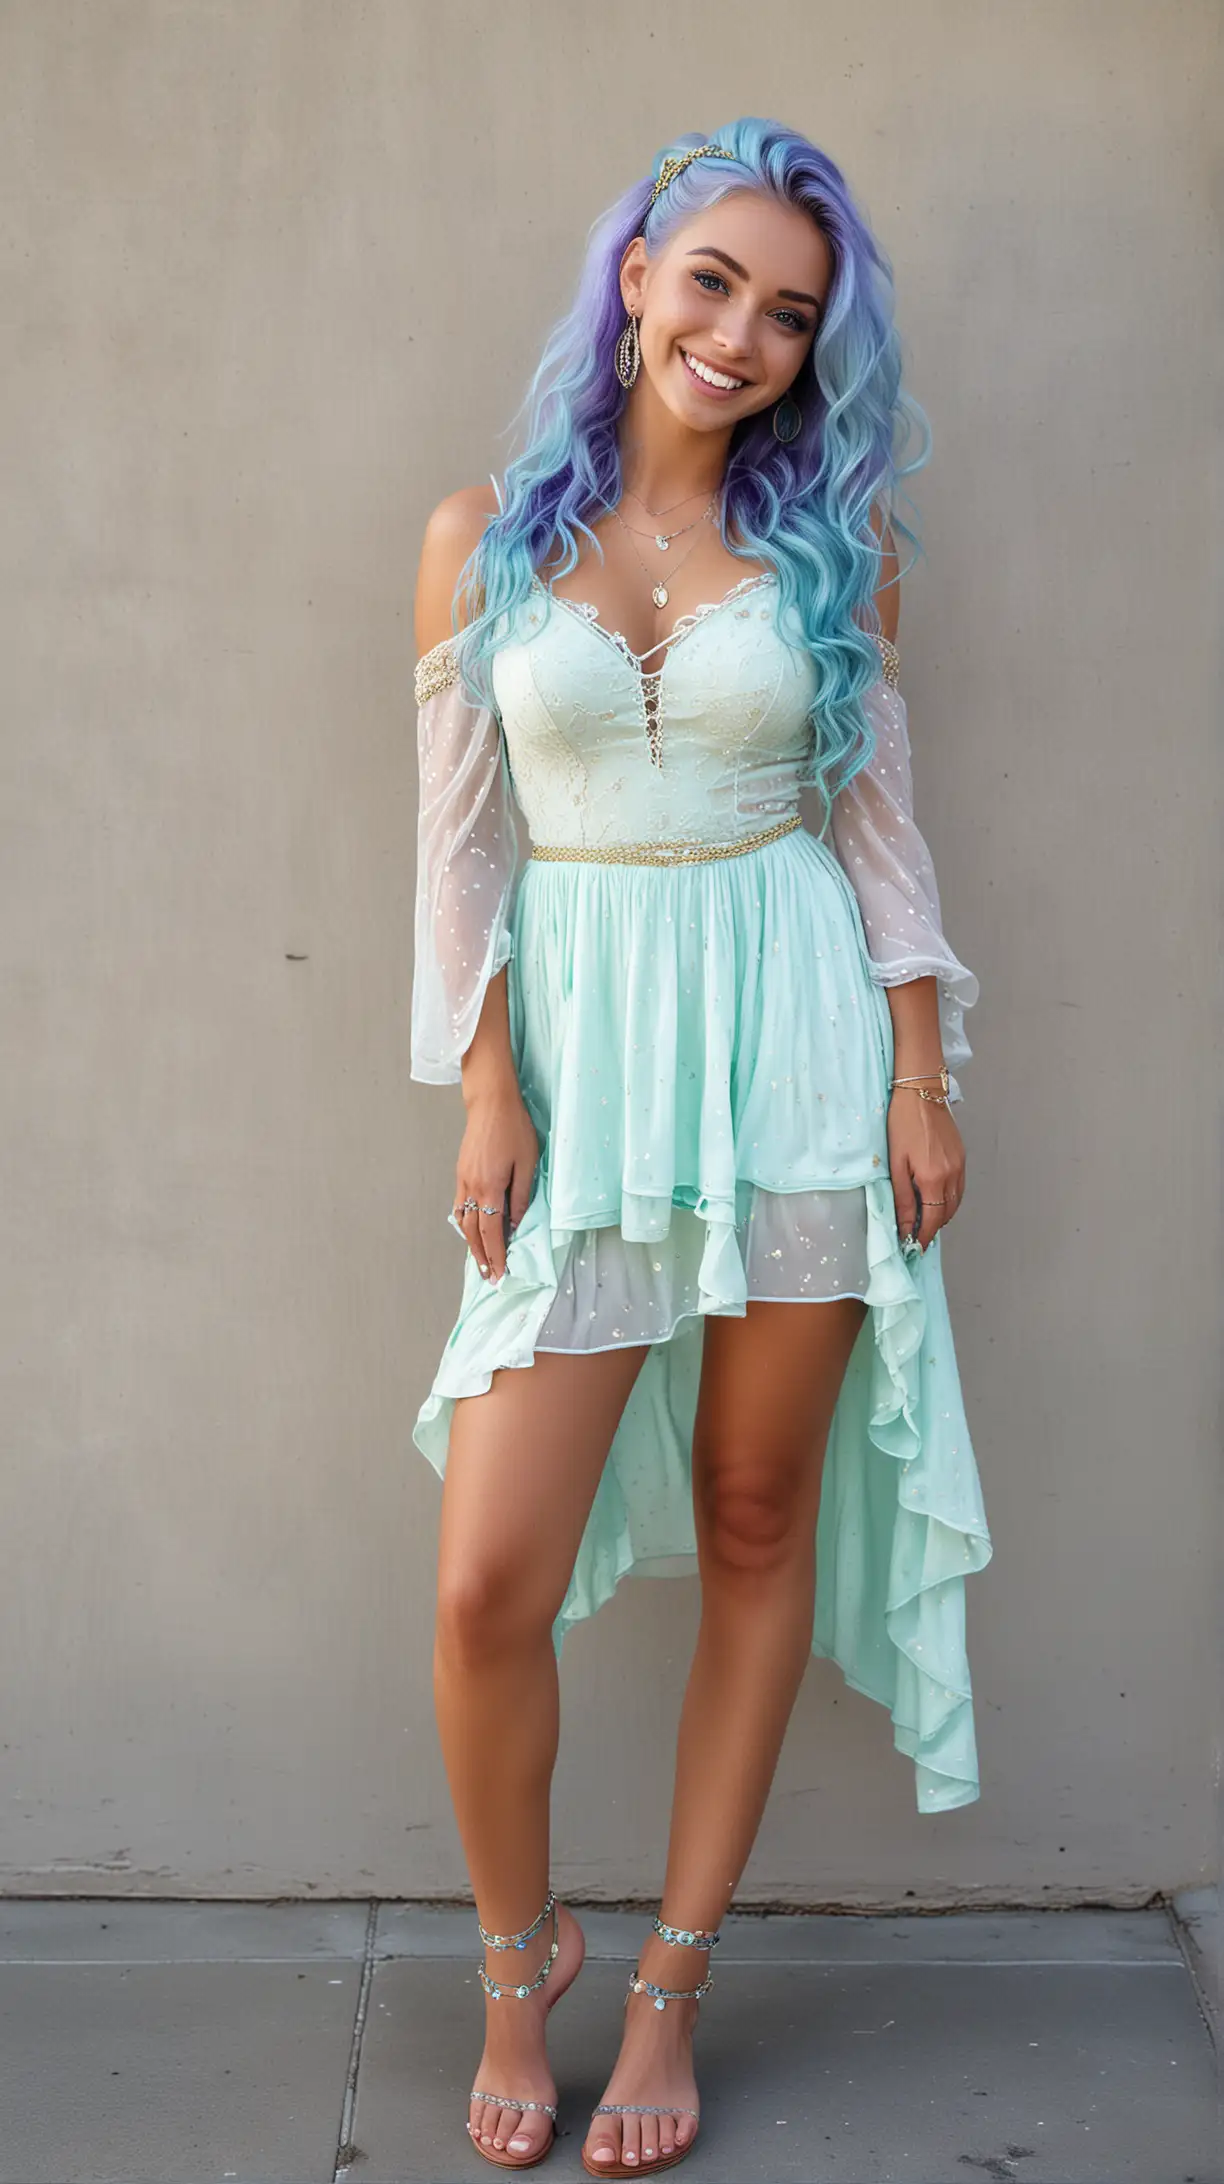 Beautiful woman with purple fluorescent eyes, long wavy turquoise hair that looks like an aquamarine gemstone, beautiful smile, freckled face. 28inch shoulders, 26inch waist, 34inch hips. Wearing a majestic dress with a 16carot gold anklet on her left leg, and and a 18carot sterling silver wedding ring on her left hand, and toe ring on her foot. Barefoot and leaning against a wall. Full body shot